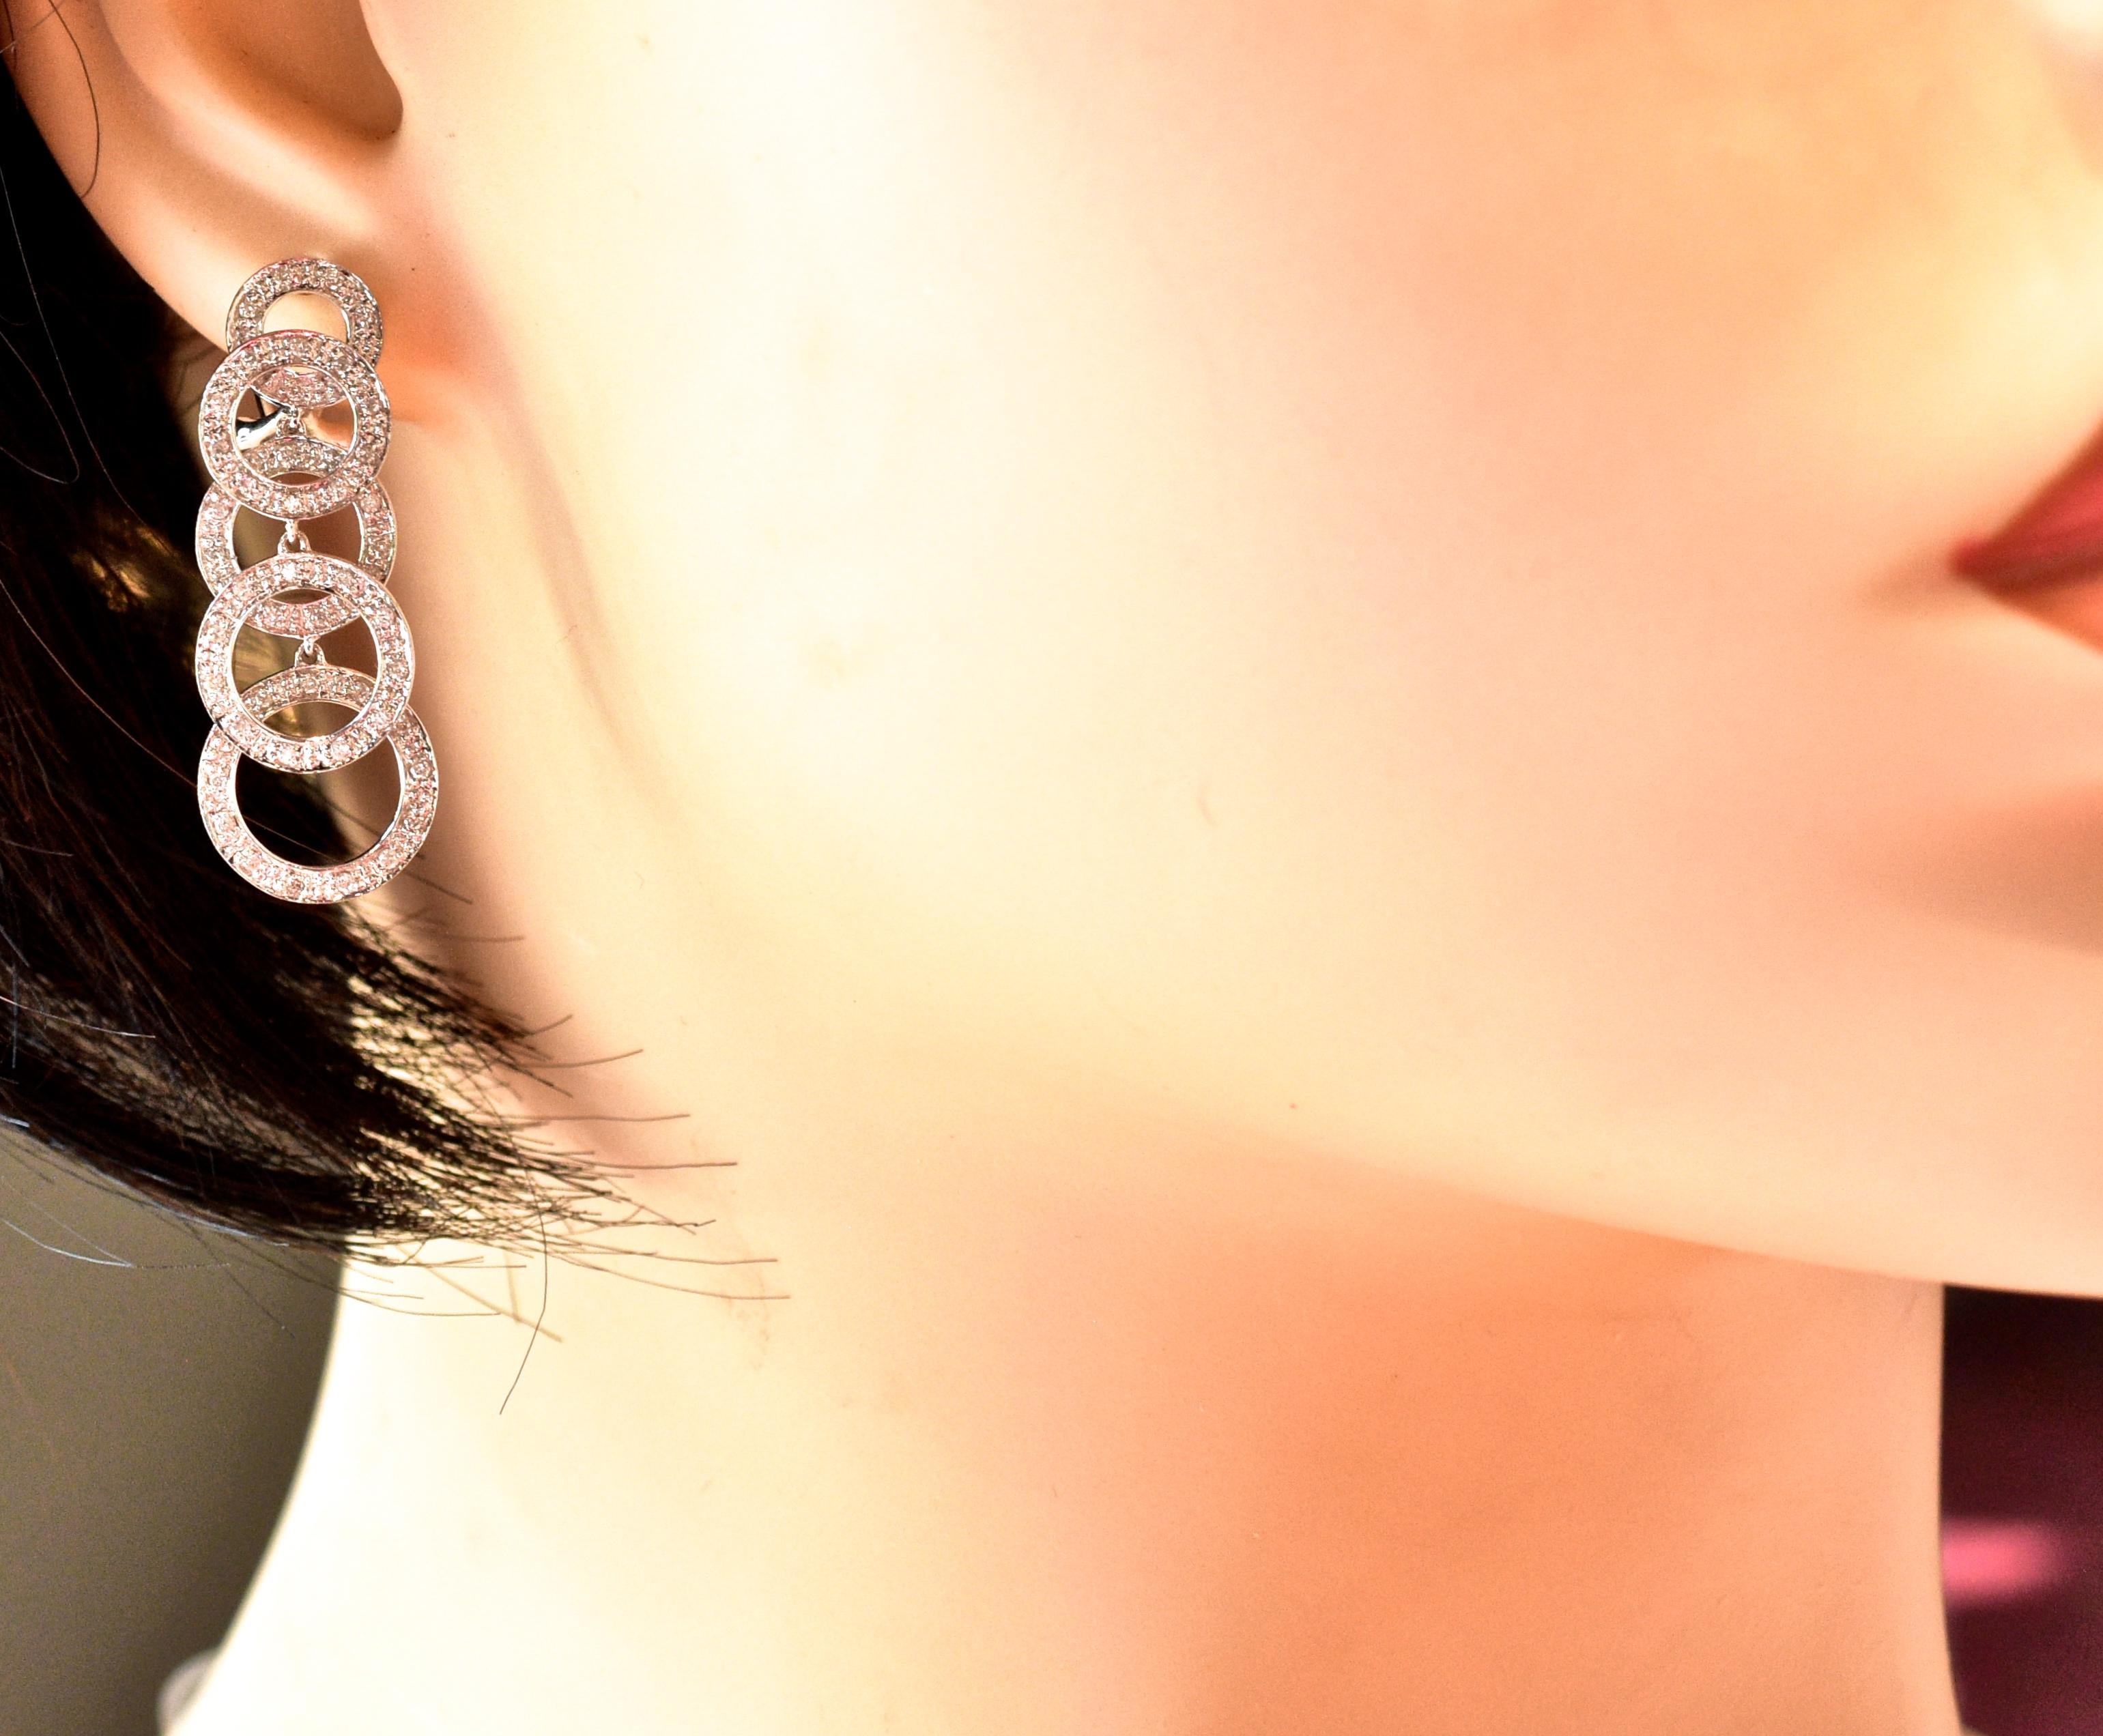 Contemporary Diamond and White Gold Dangling Earrings